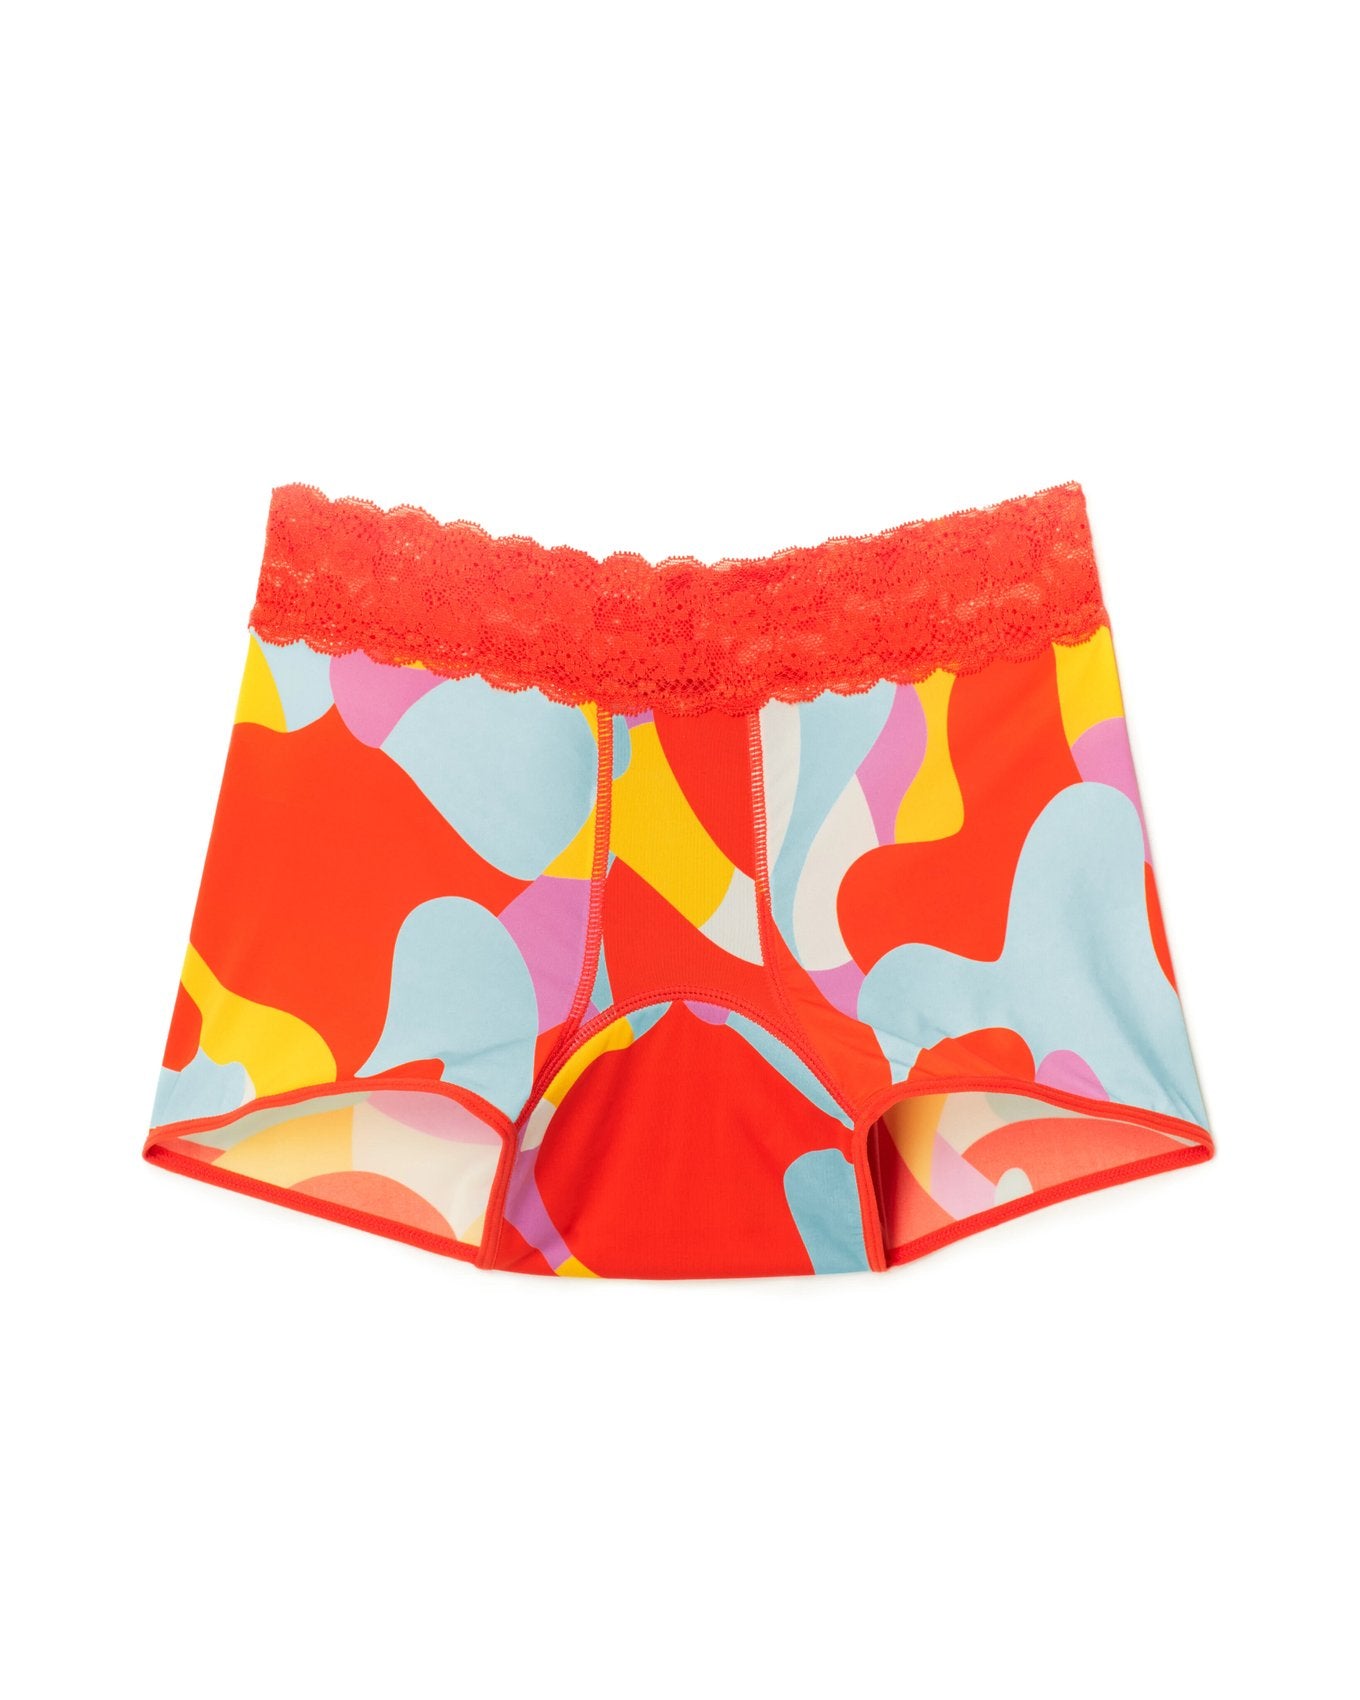 Joyja Emily period-proof panty in color Abstract Forms C02 and shape shortie